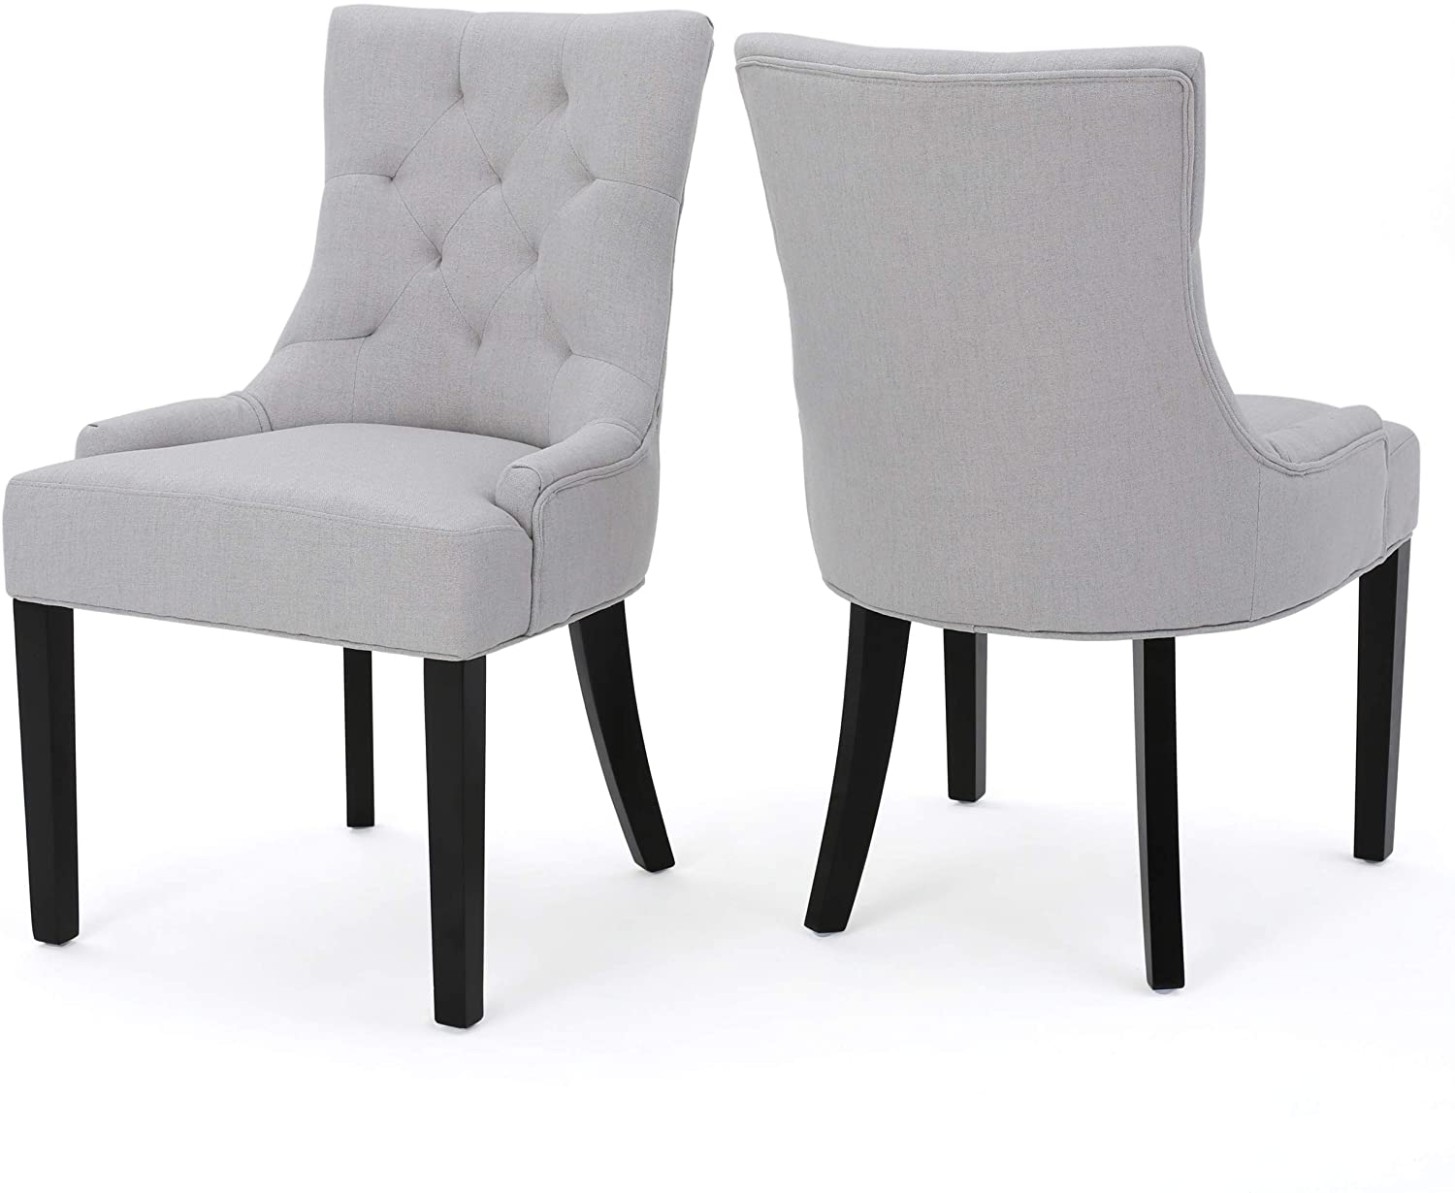 Christopher Knight Home Hayden Fabric Dining Chairs, 3-Pcs Set, Light Grey - grey kitchen chairs